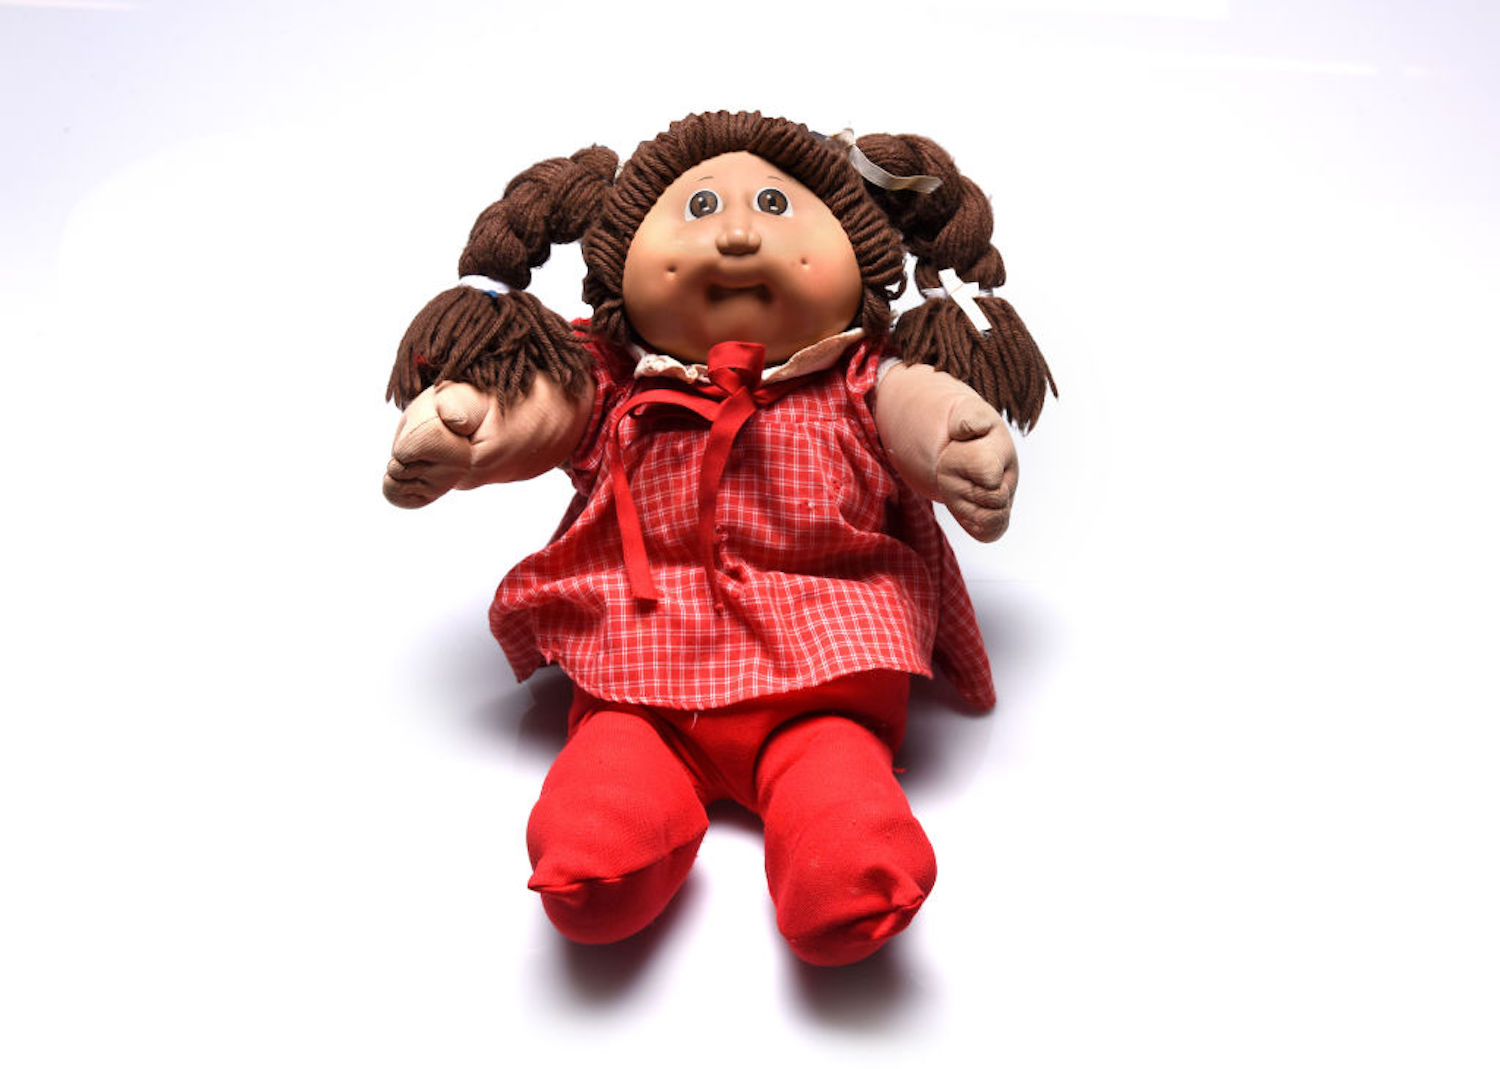 Vintage 1982 Cabbage Patch Kids Doll Red Hair Dimple Faced Girl Cabbage Patch